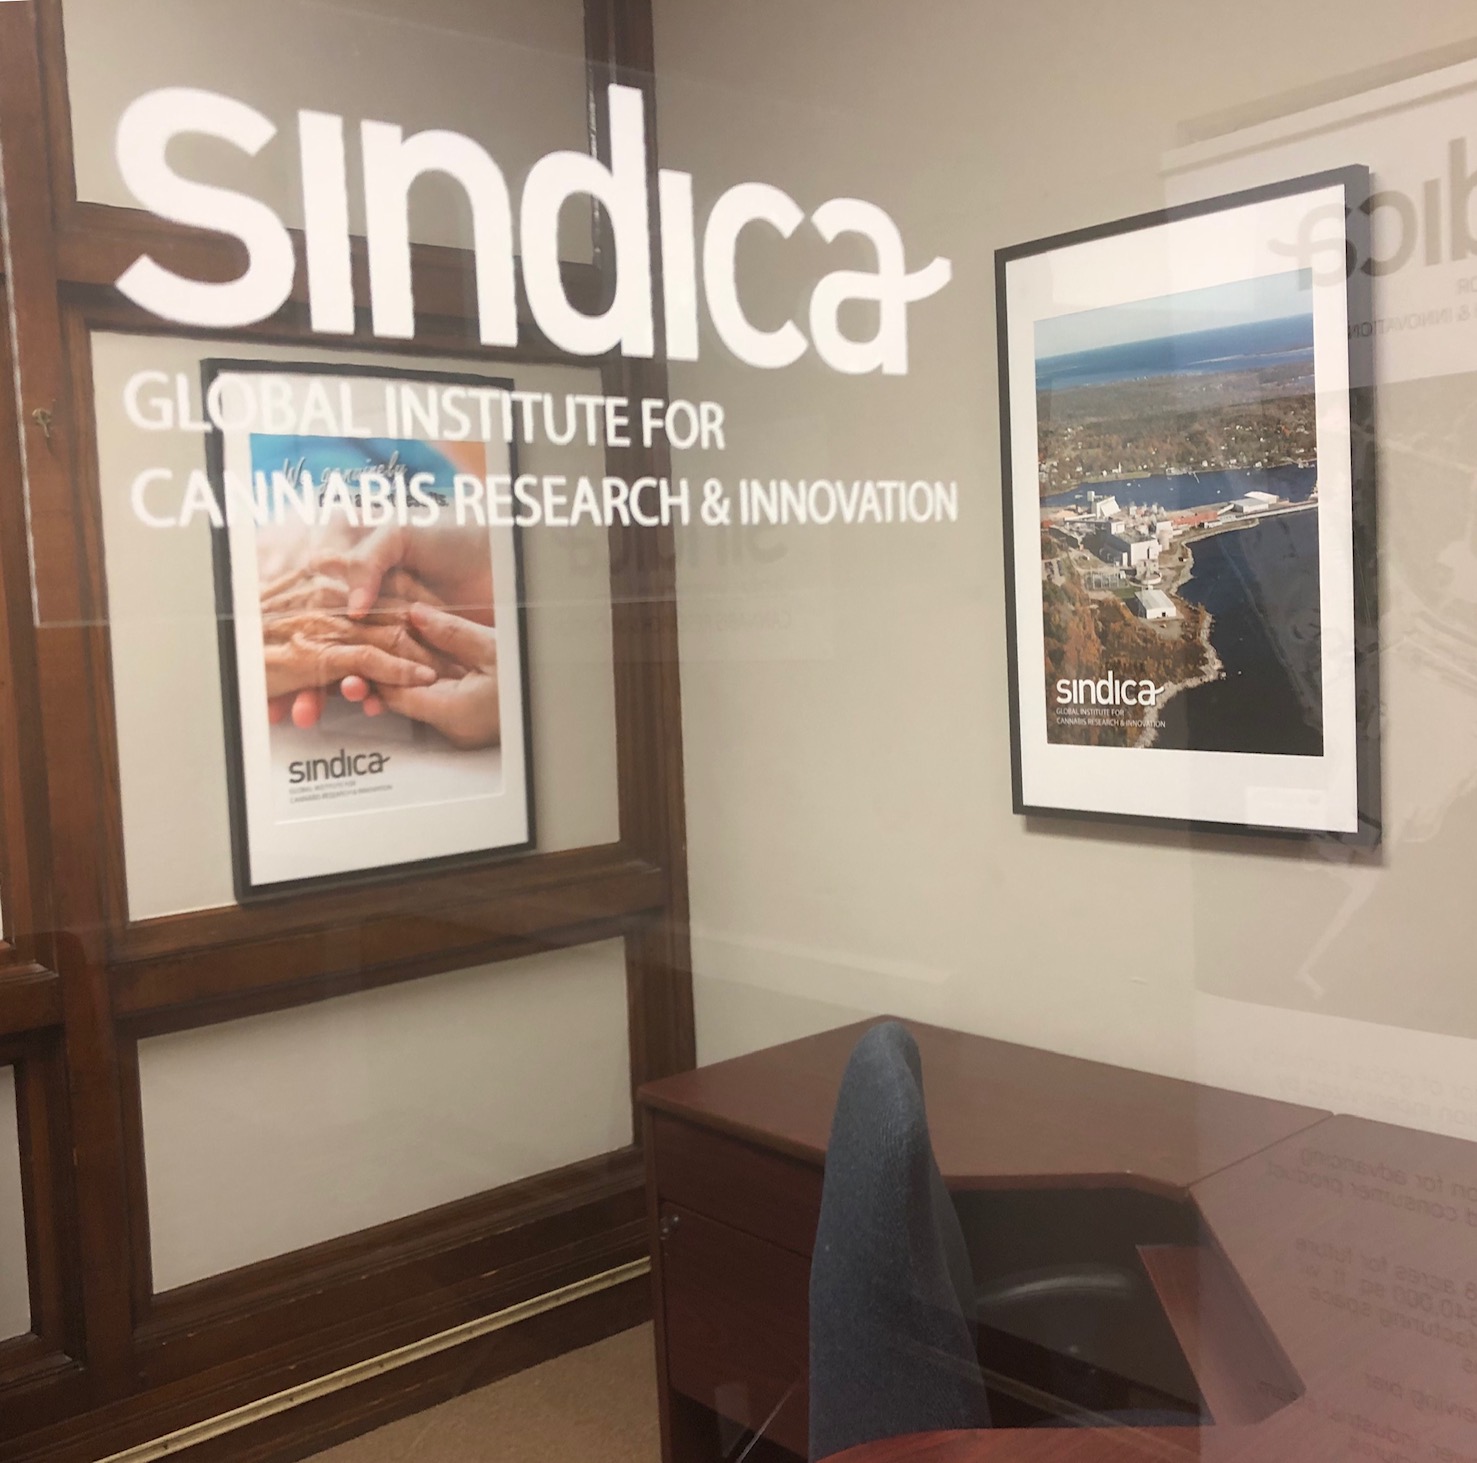 Sindica Global Institute for Cannabis Research & Innovation